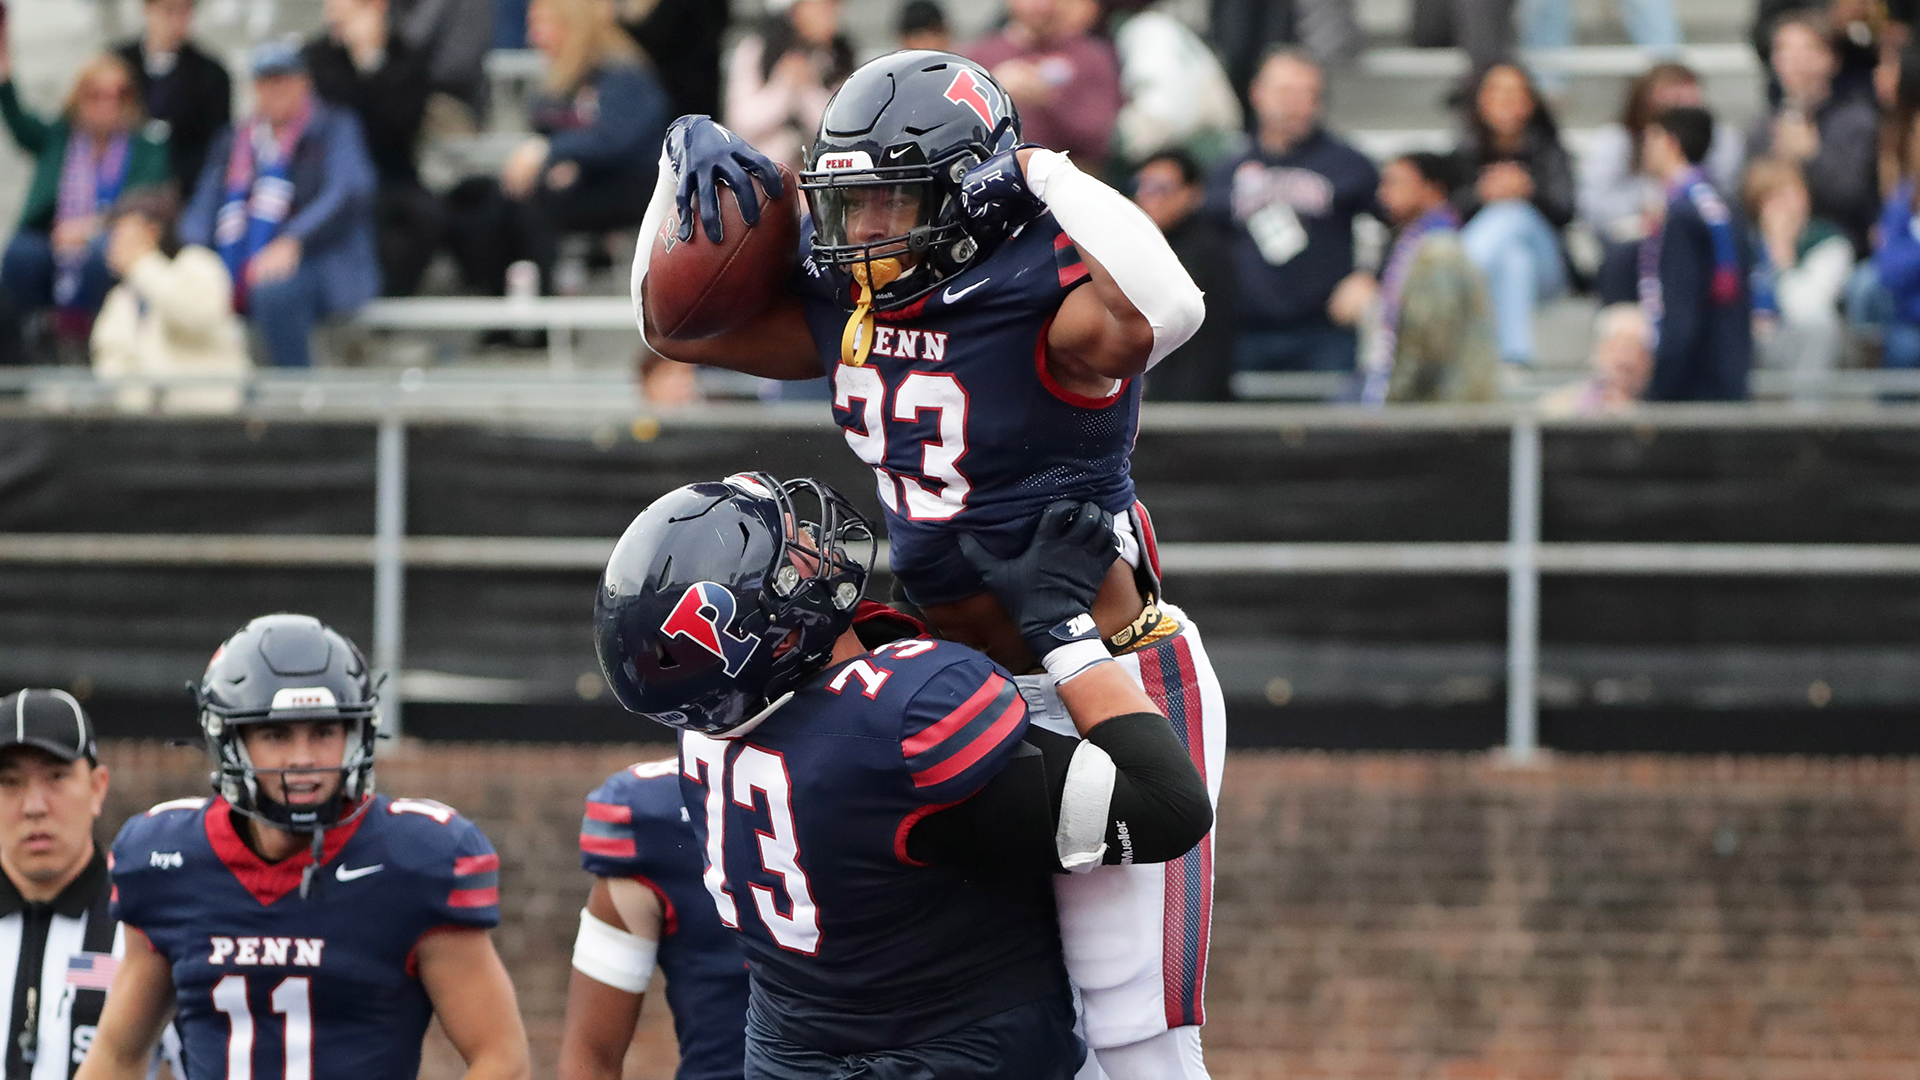 Malachi Hosley flexes while a teammate lifts him in the air after scoring a touchdown against Cornell.